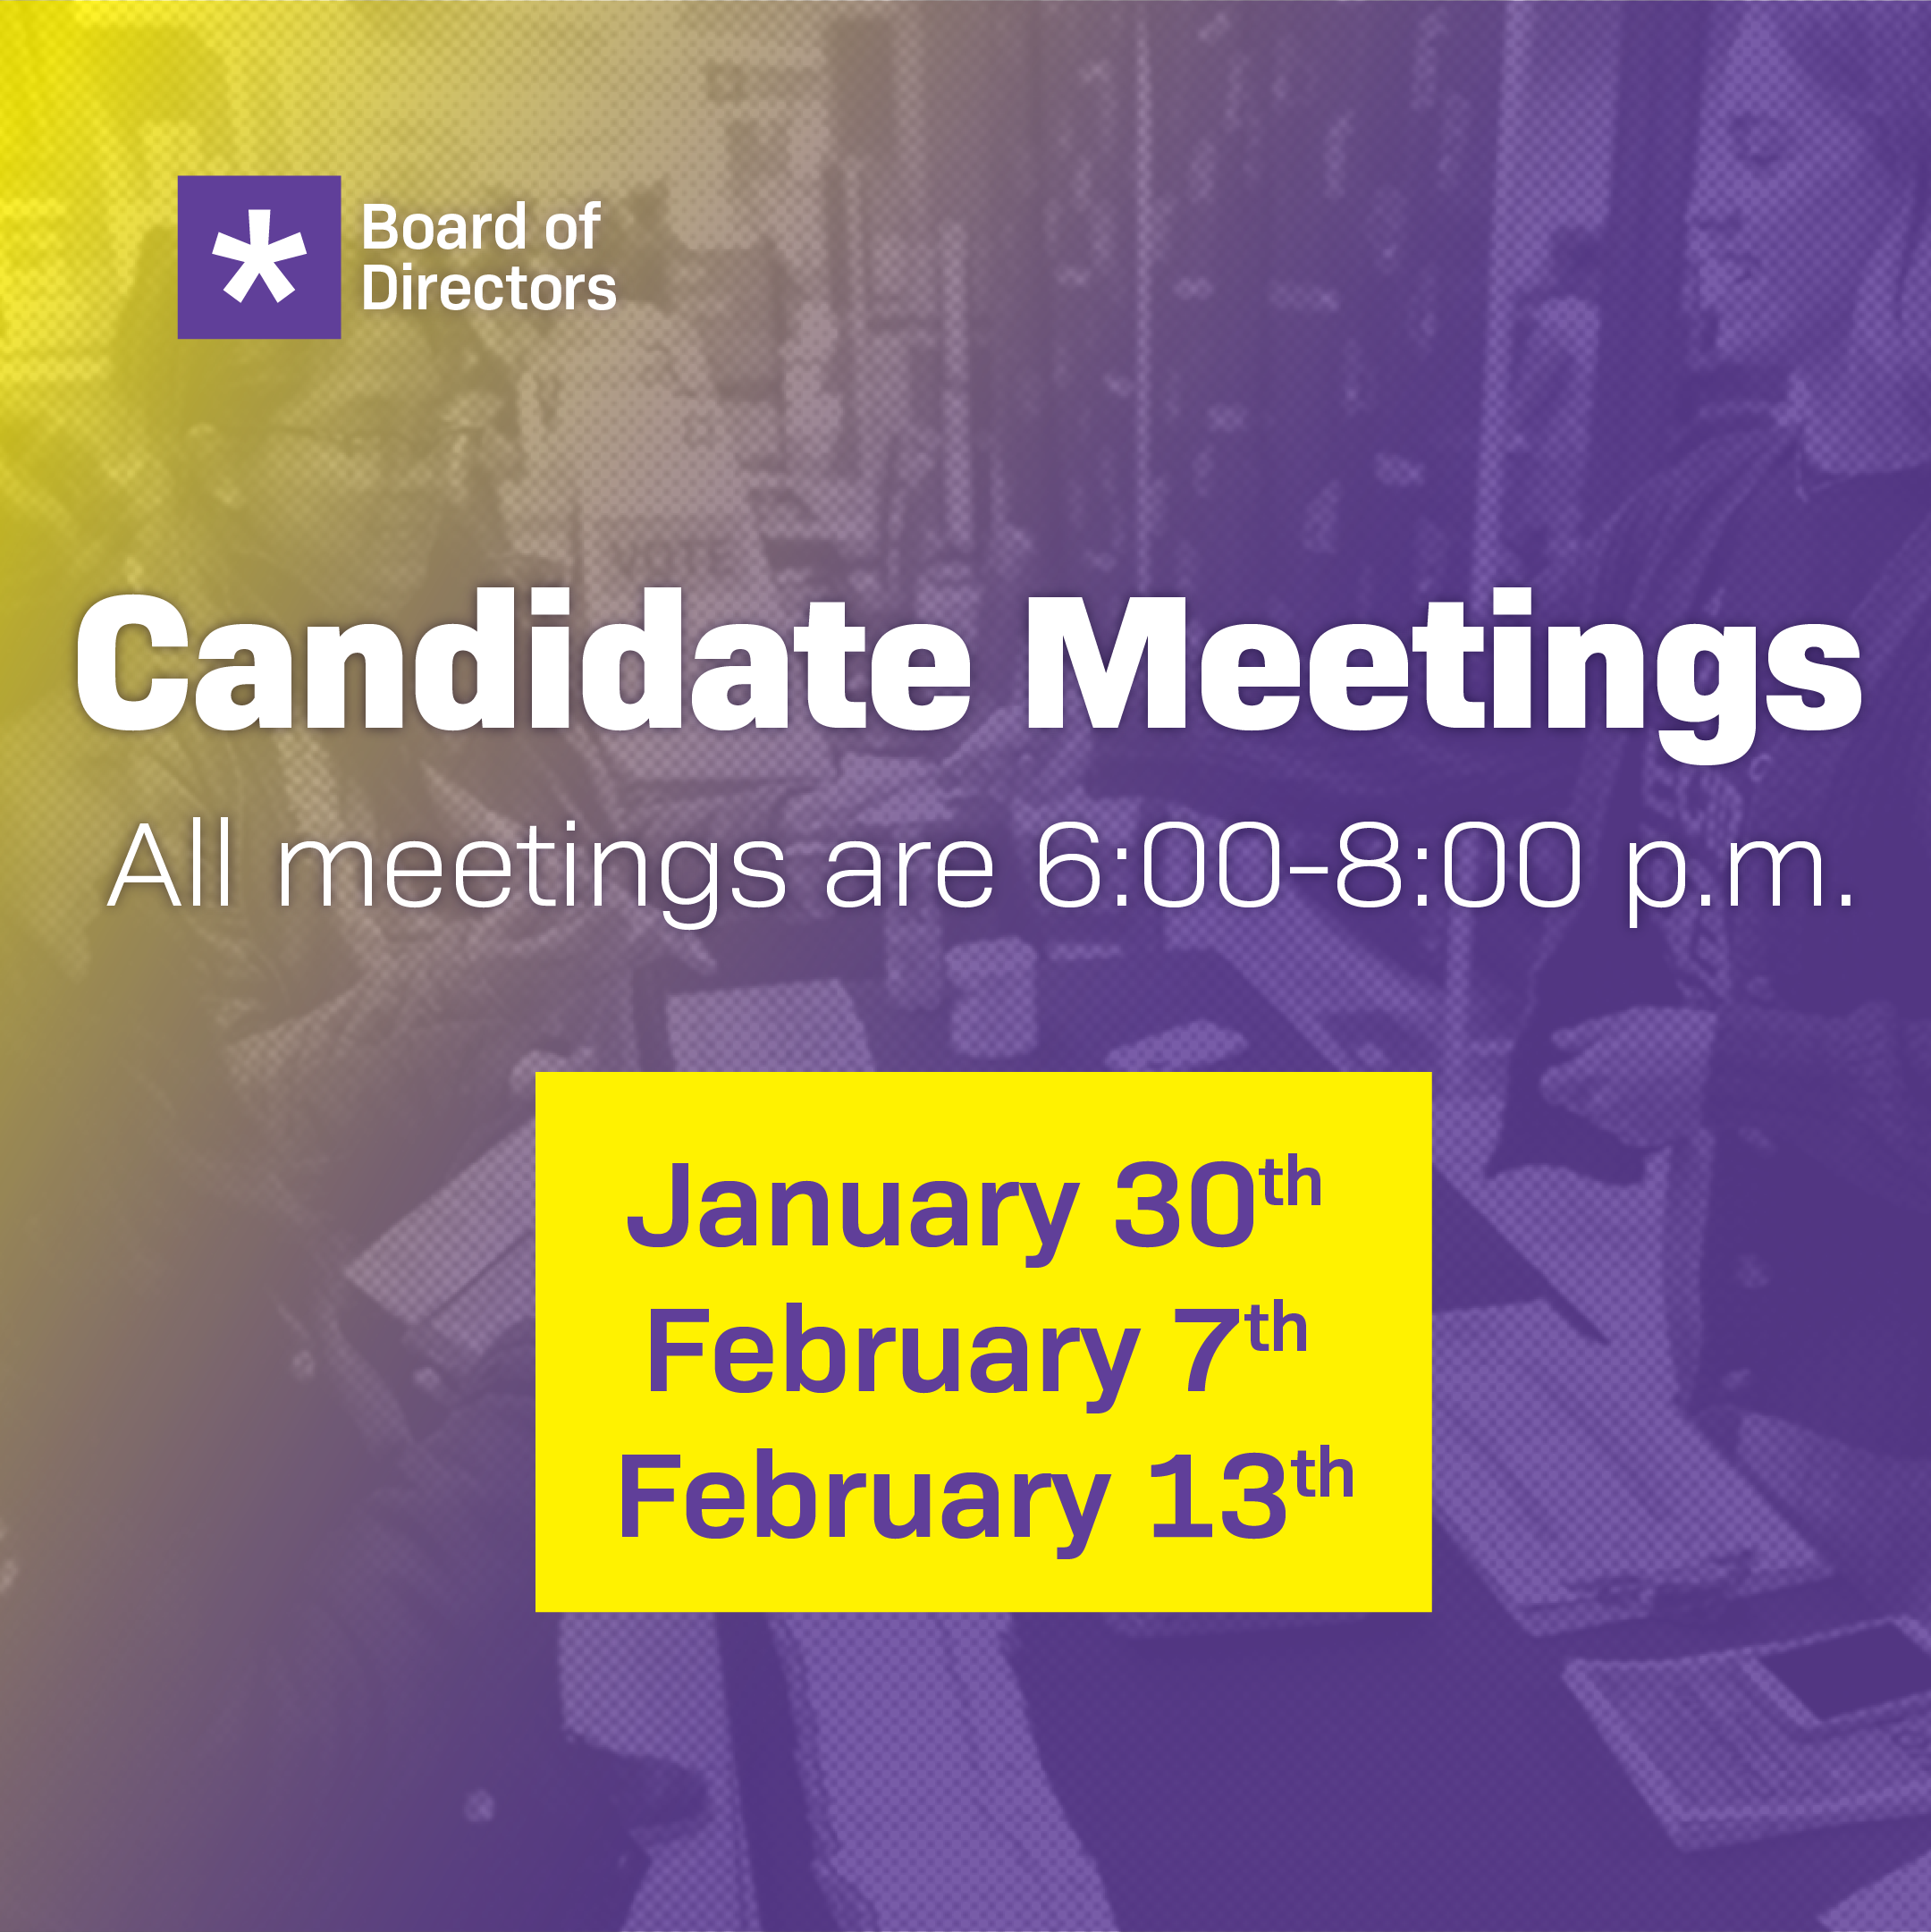 BOD Candidate Meeting CandidateMeetings 1080